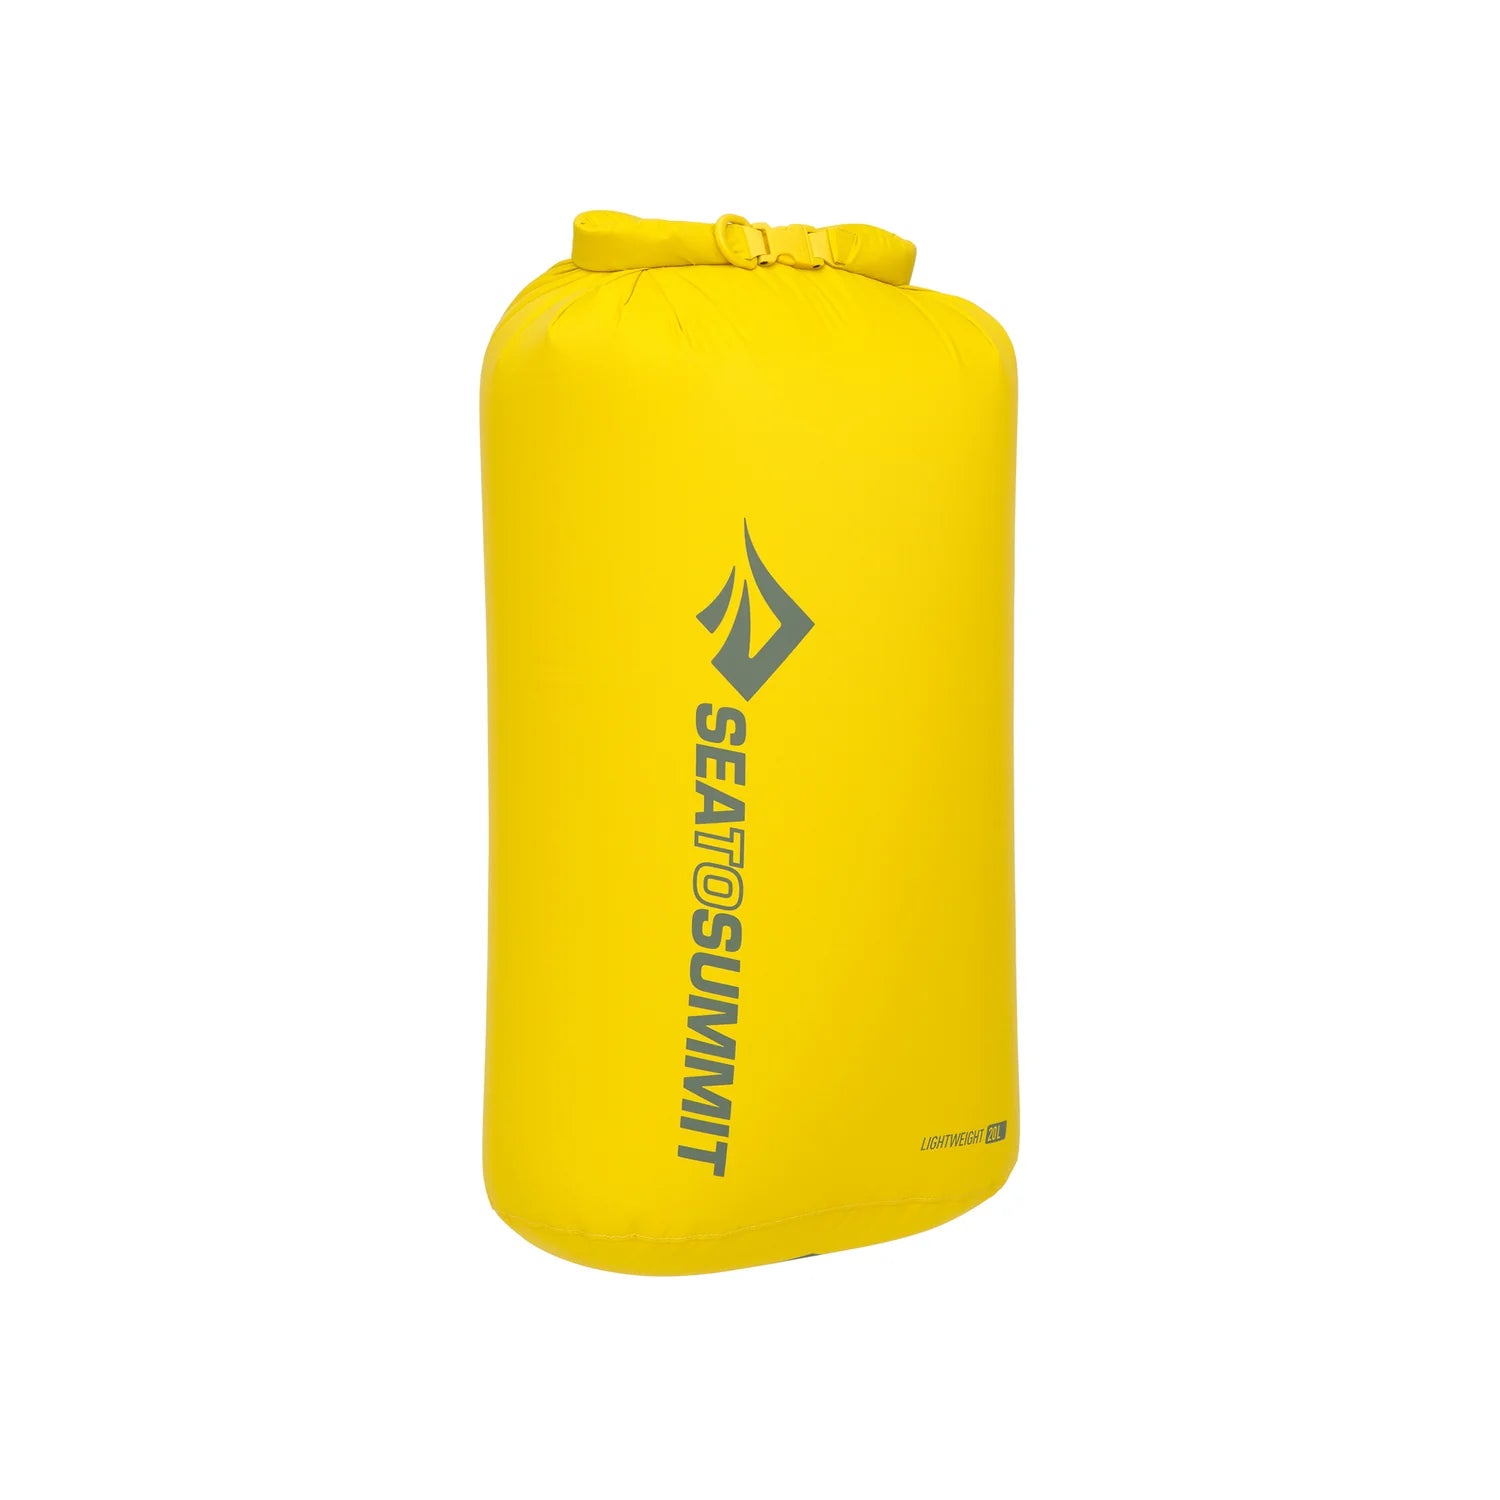 Sea to Summit - Lightweight Dry Bag 20L - Sulpher